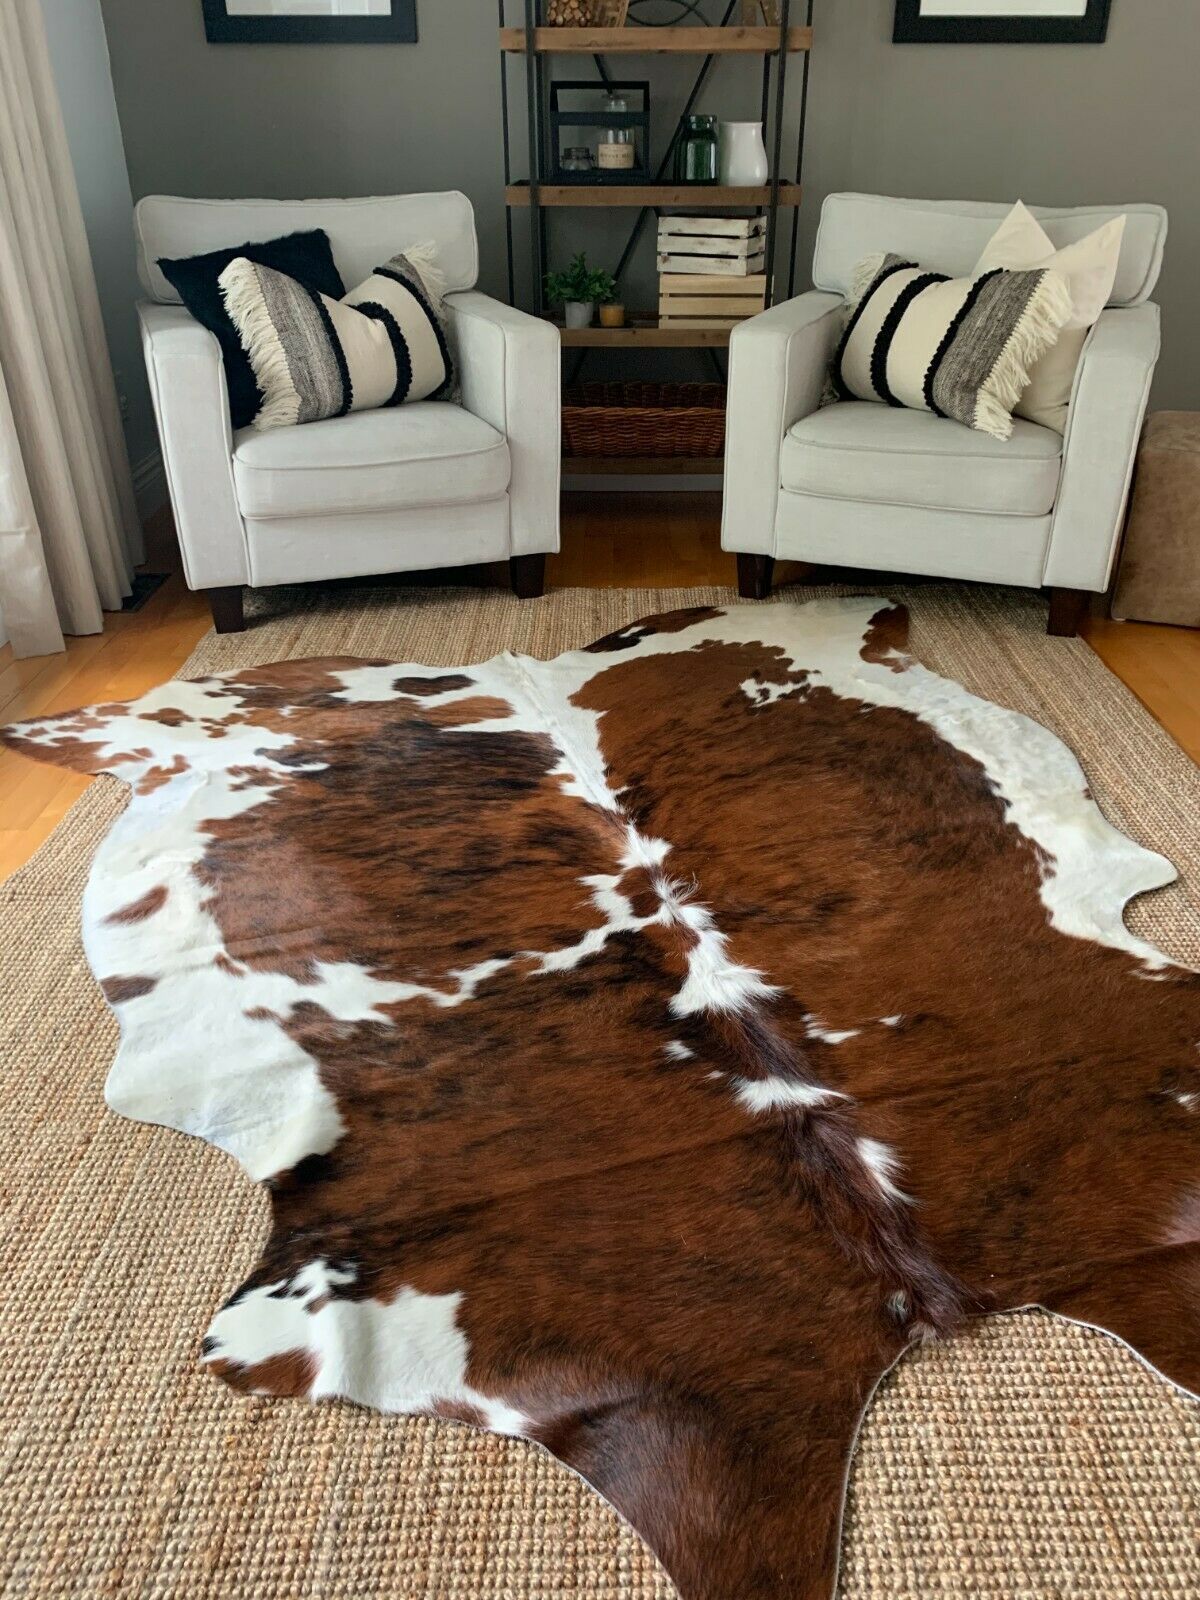 Primary image for New Cowhide Rug Tricolor Brown Cow Hide Skin Leather Rug Average Size 7.7X7 feet